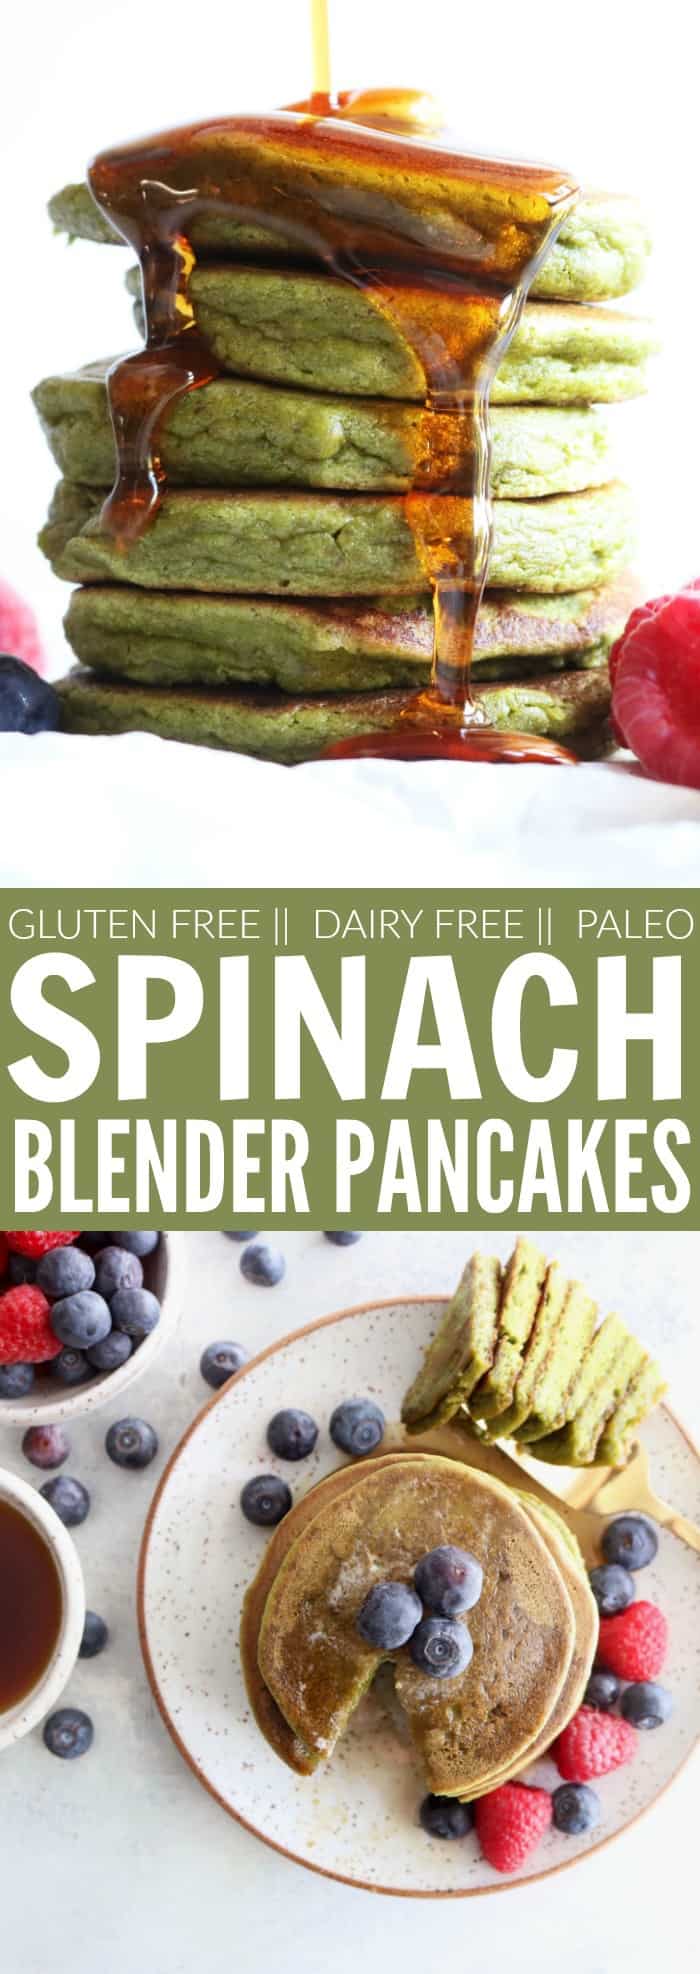 These Spinach Blender Pancakes are perfect for your St. Patrick's Day celebration or any weekend brunch! I love that they're packed with nutrients from the spinach, gluten free, and paleo! thetoastedpinenut.com #glutenfree #paleo #pancakes #spinach #blender #healthy #stpaddysday #stpatricksday #thetoastedpinenut #brunch #breakfast